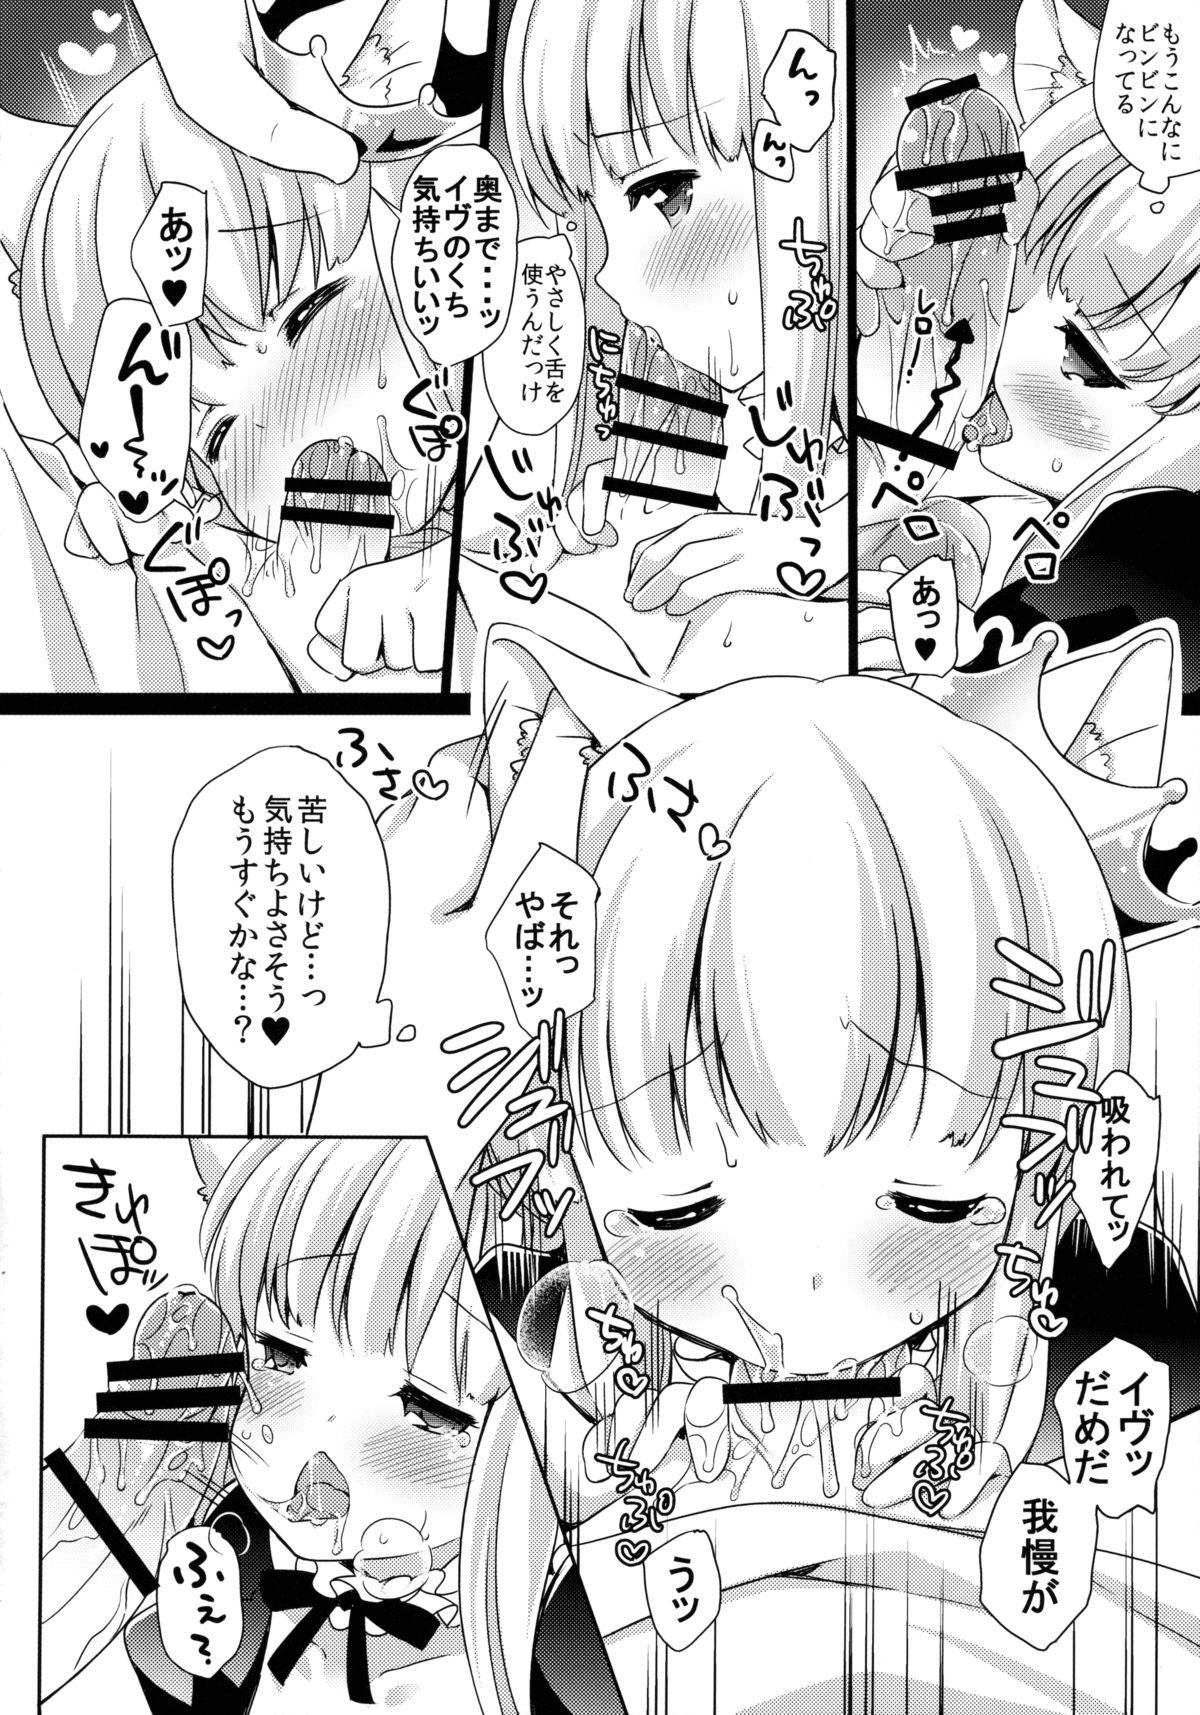 Amatures Gone Wild Kyou no Nyanko LoliCo 04 1080p - Page 11